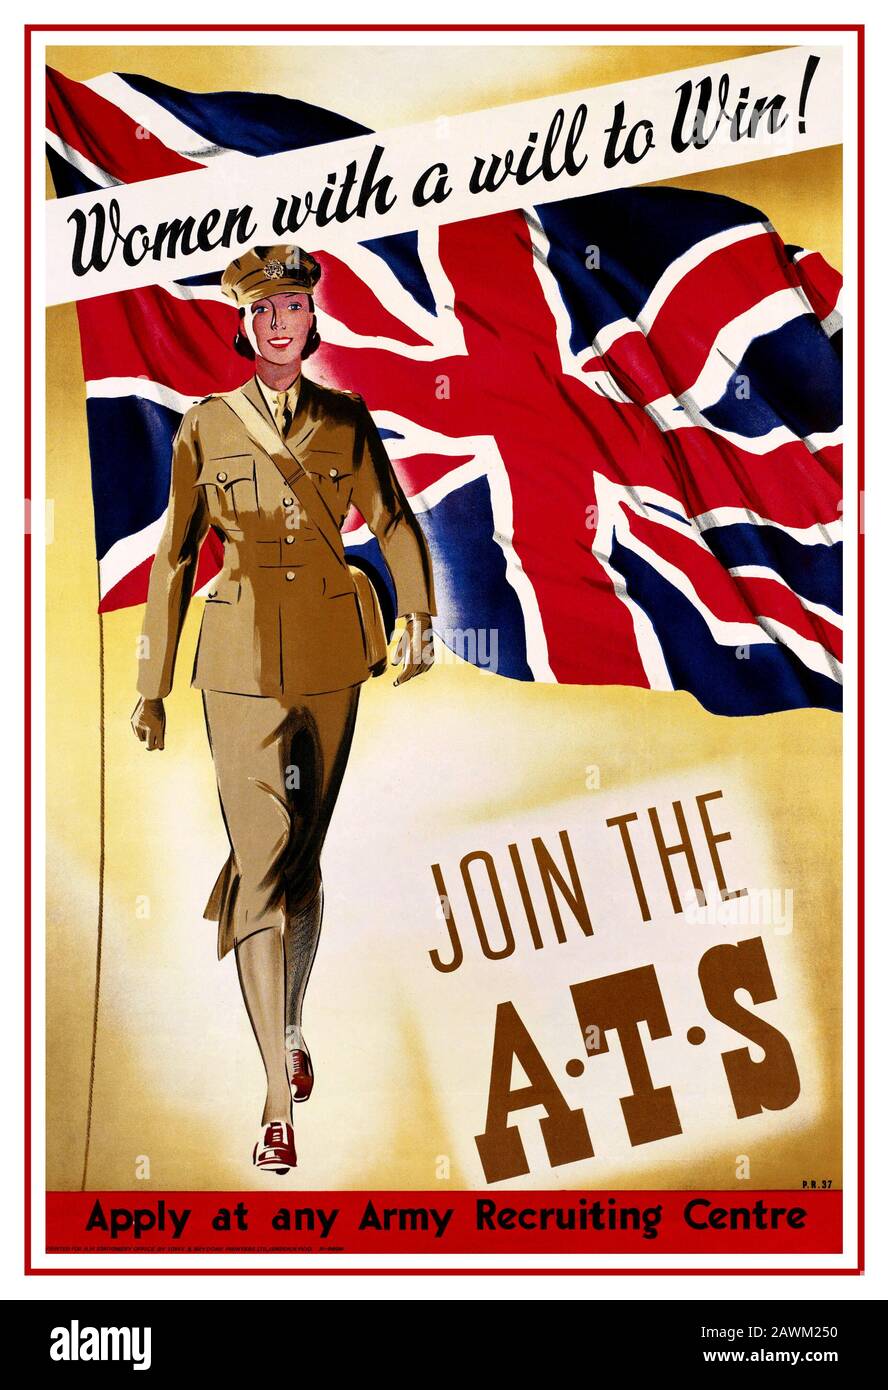 Vintage WW2 Recruitment Poster with female ATS member in uniform. Union Jack flag flies behind. “Women with a will to Win! JOIN THE A.T.S” Apply at any Army Recruiting Centre 1939-1945 Stock Photo